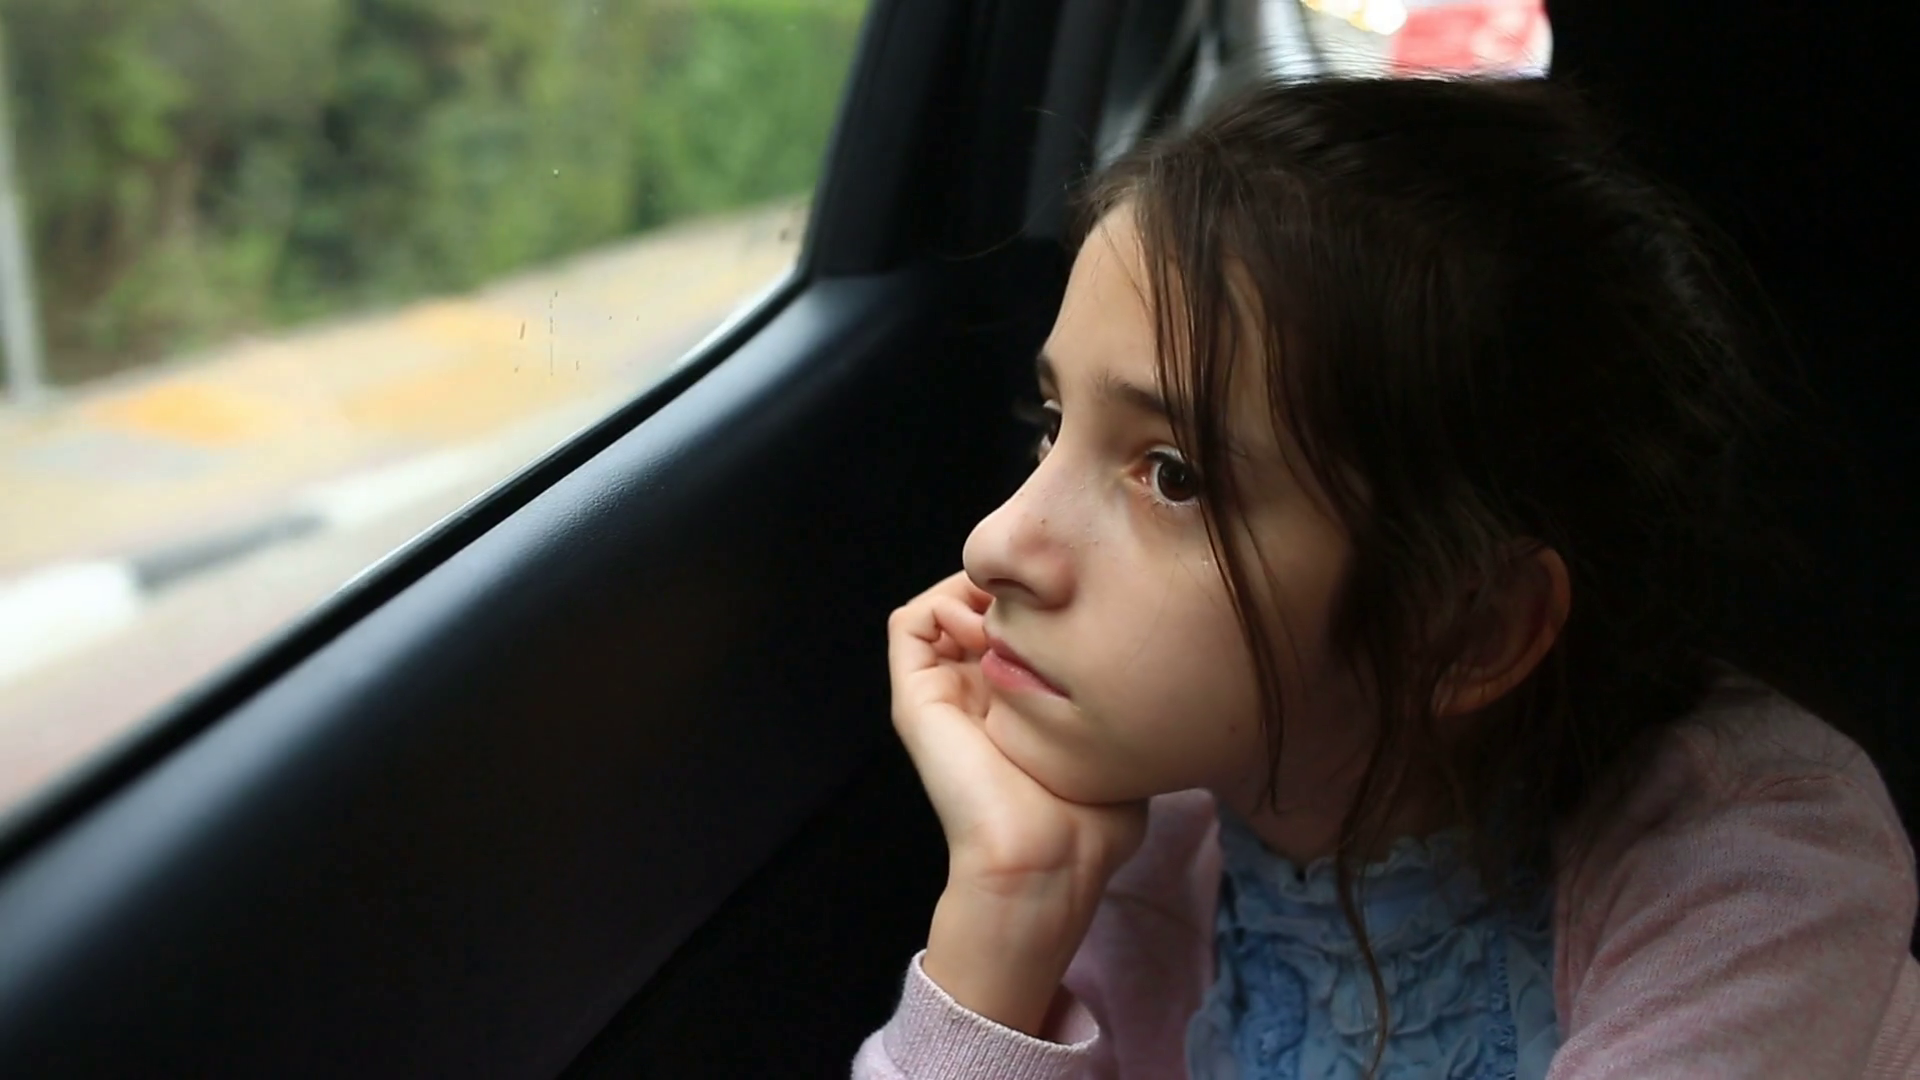 Little girl bored in car - staring into space through window - great ...